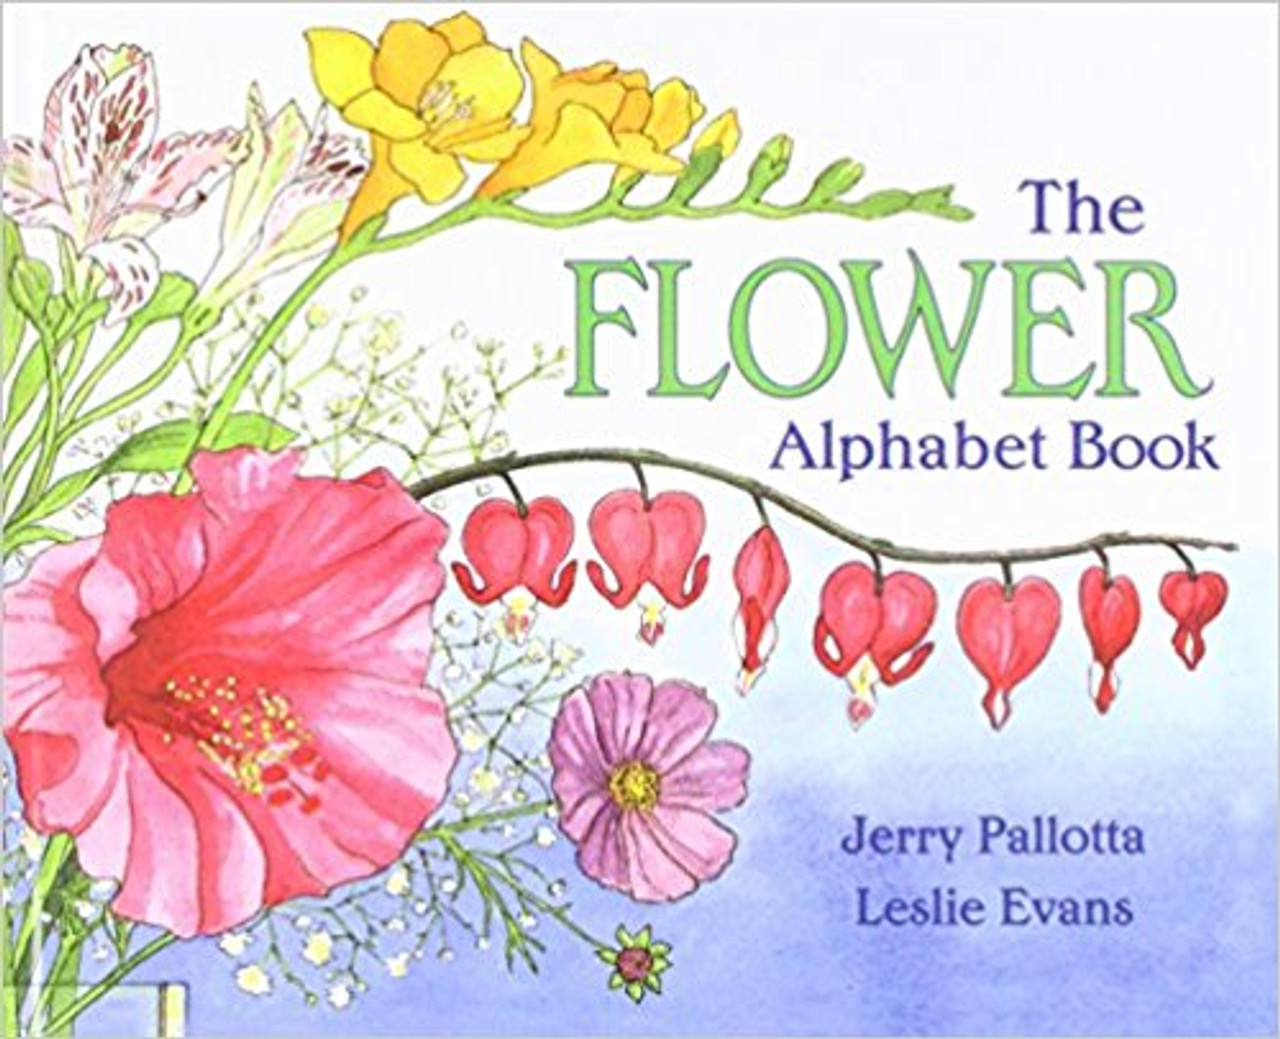 Describes a variety of flowers from A-Z, beginning with the amaryllis and concluding with the zinnia.